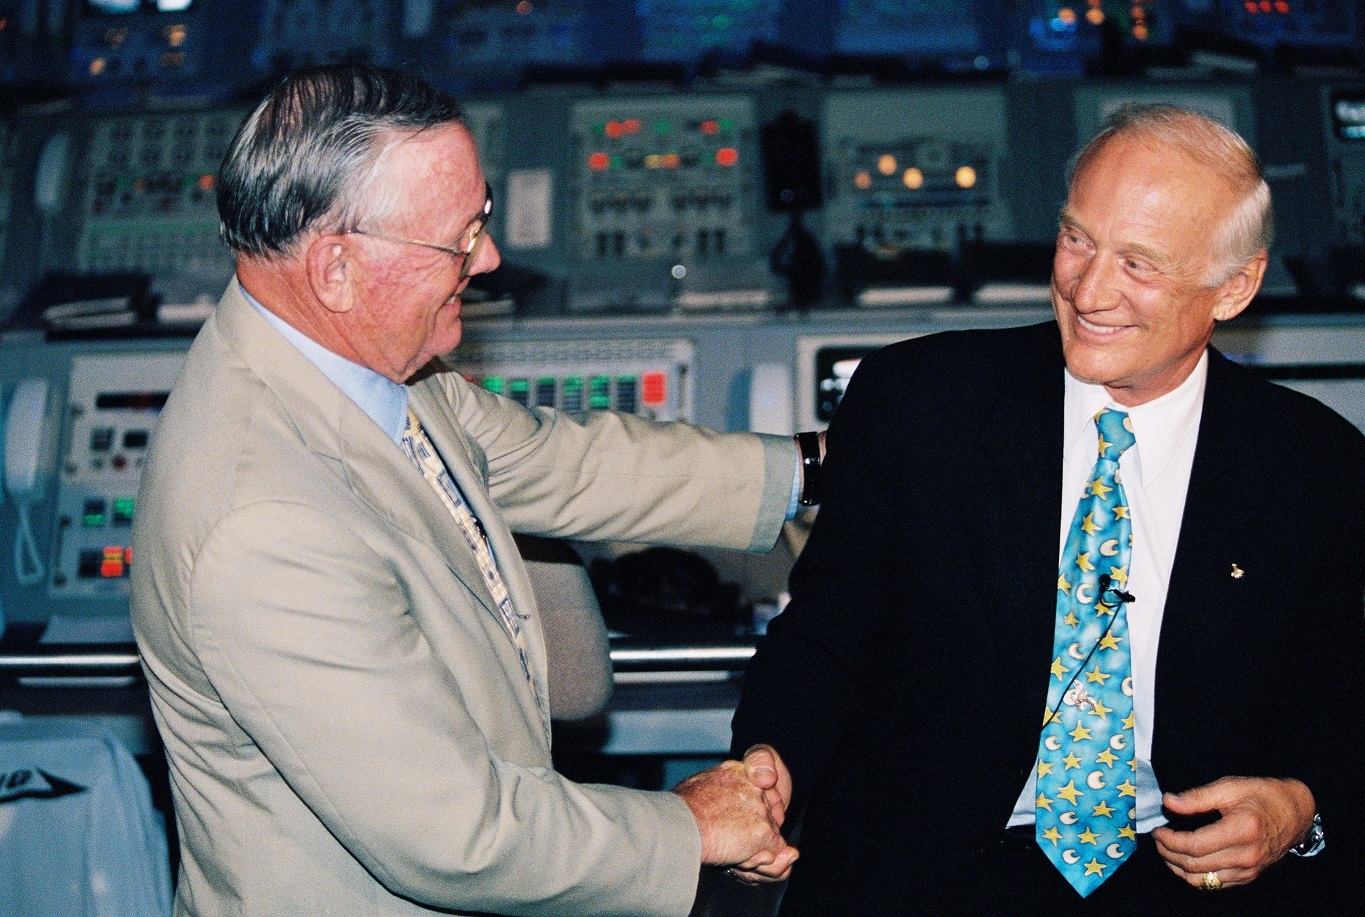 Neil Armstrong and Buzz Aldrin at Kennedy Space Center on July 16, 1999 during a 30th anniversary celebration. The crew would get together every 10 years to reflect on the mission.